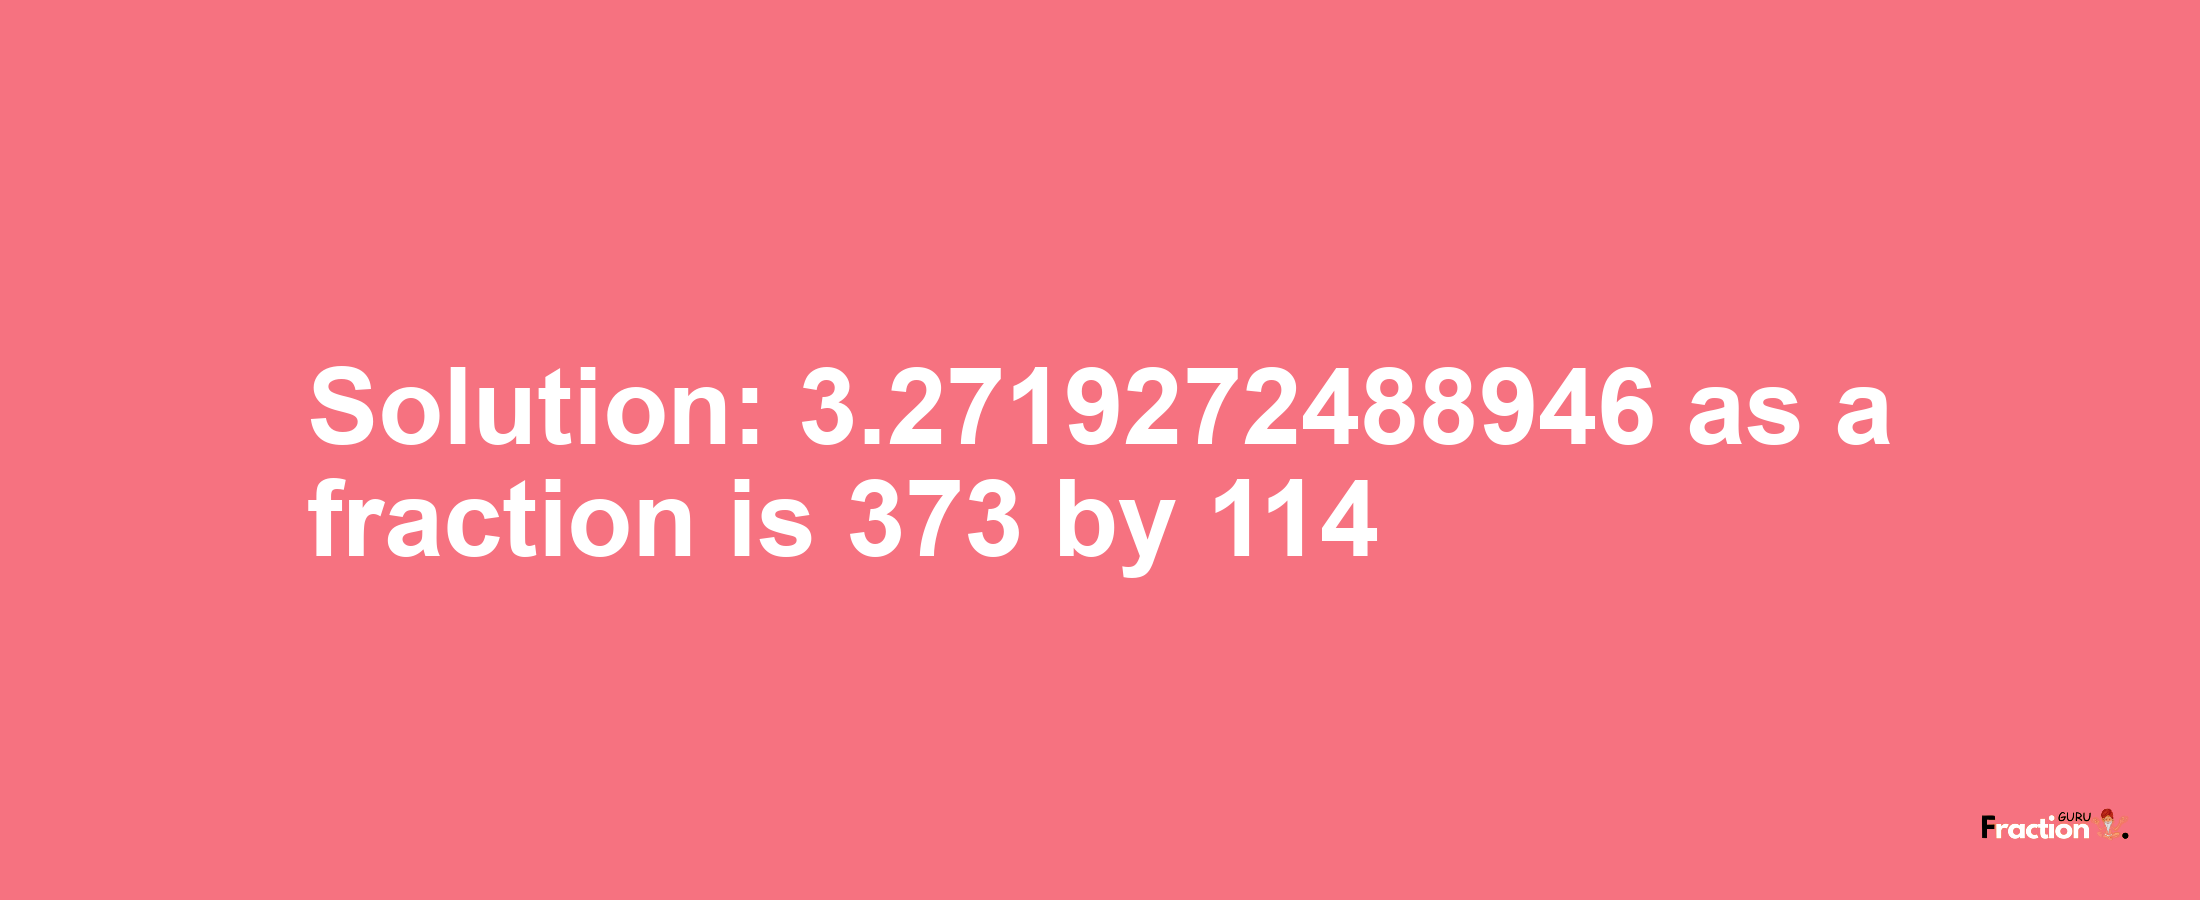 Solution:3.2719272488946 as a fraction is 373/114